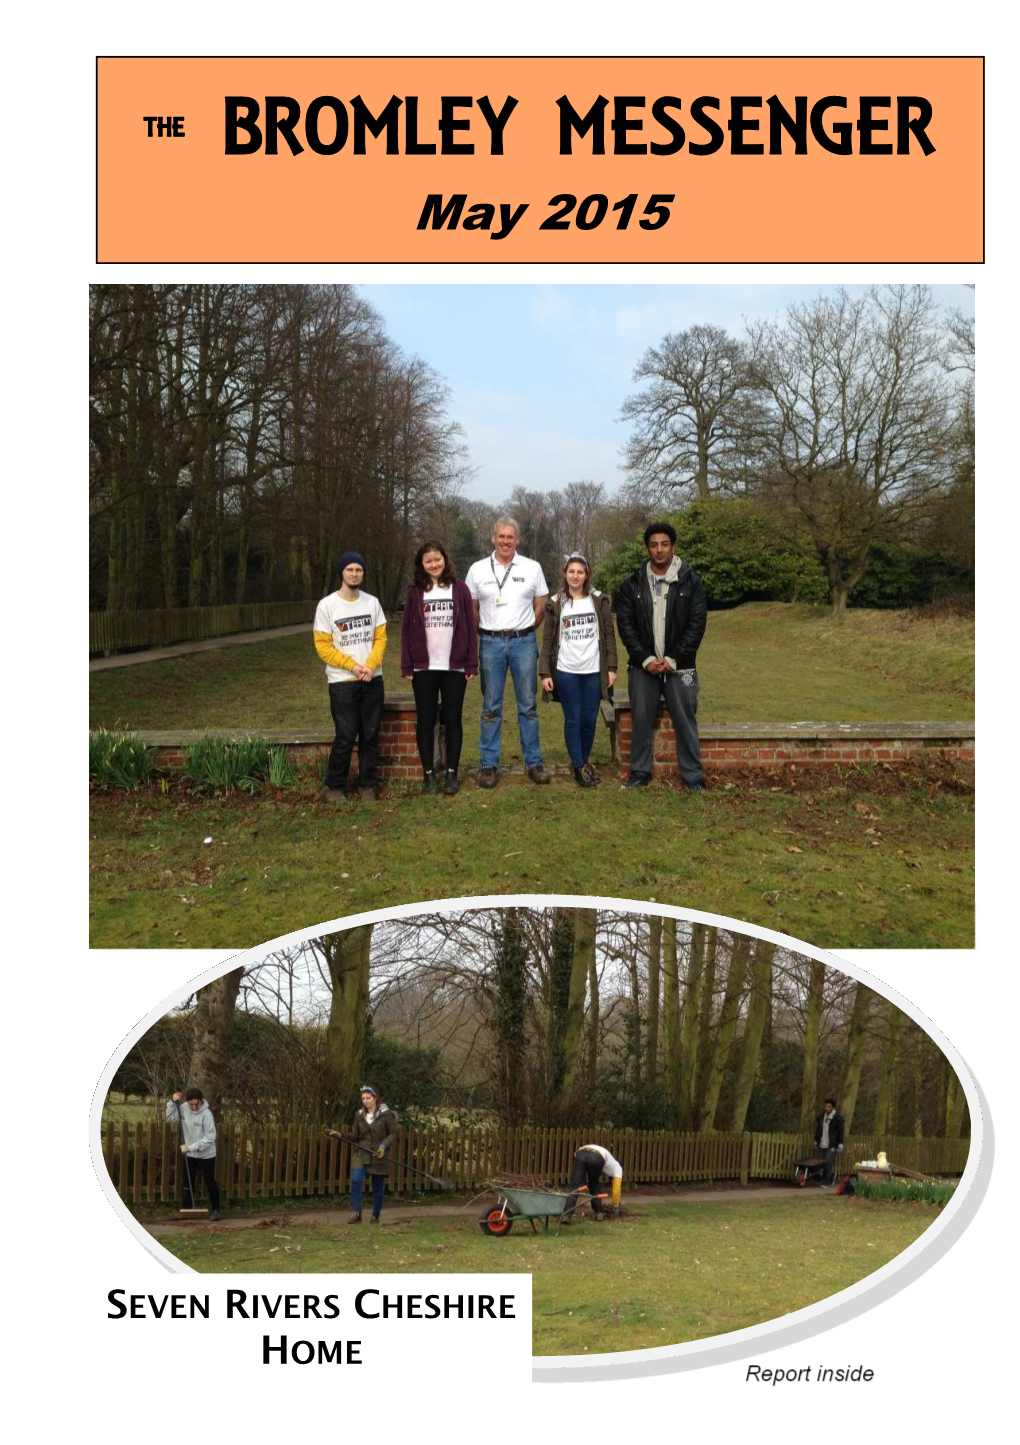 THE BROMLEY MESSENGER May 2015